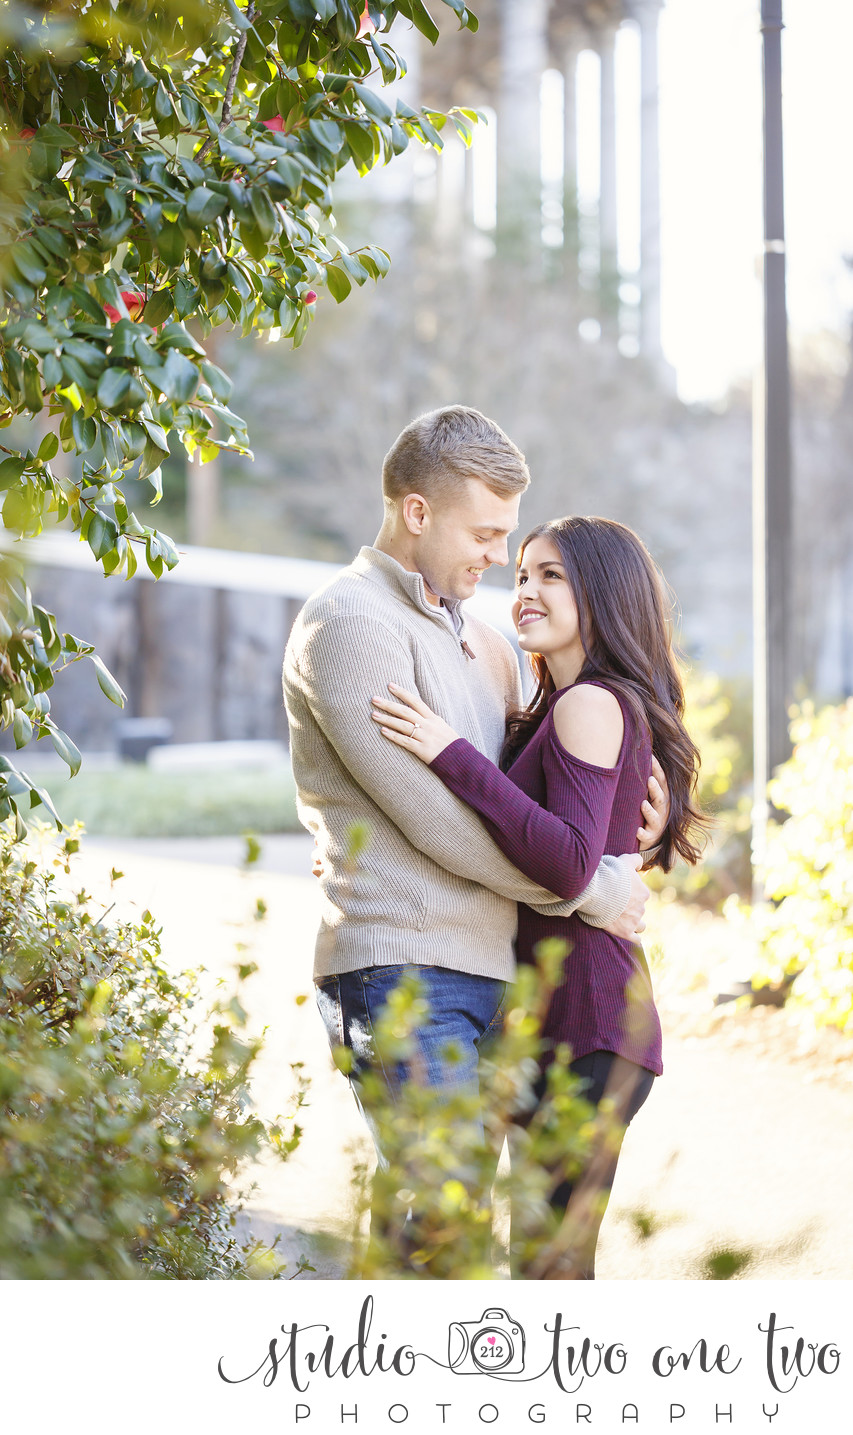 Best Engagement Photographer in Columbia, SC